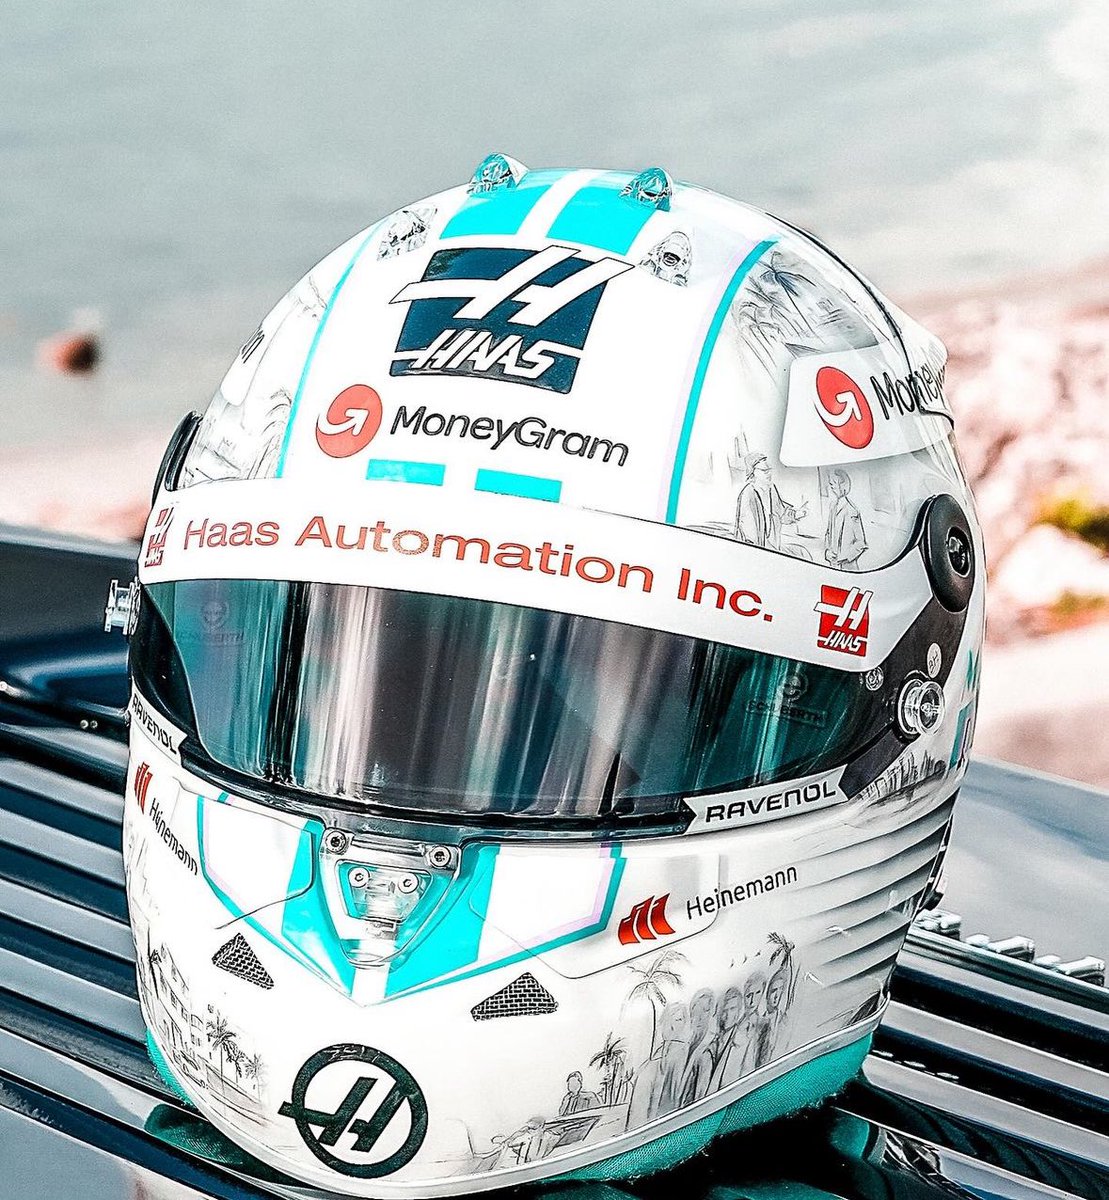 The special Miami Vice helmet for @HulkHulkenberg to wear for the Miami GP. #uniswag